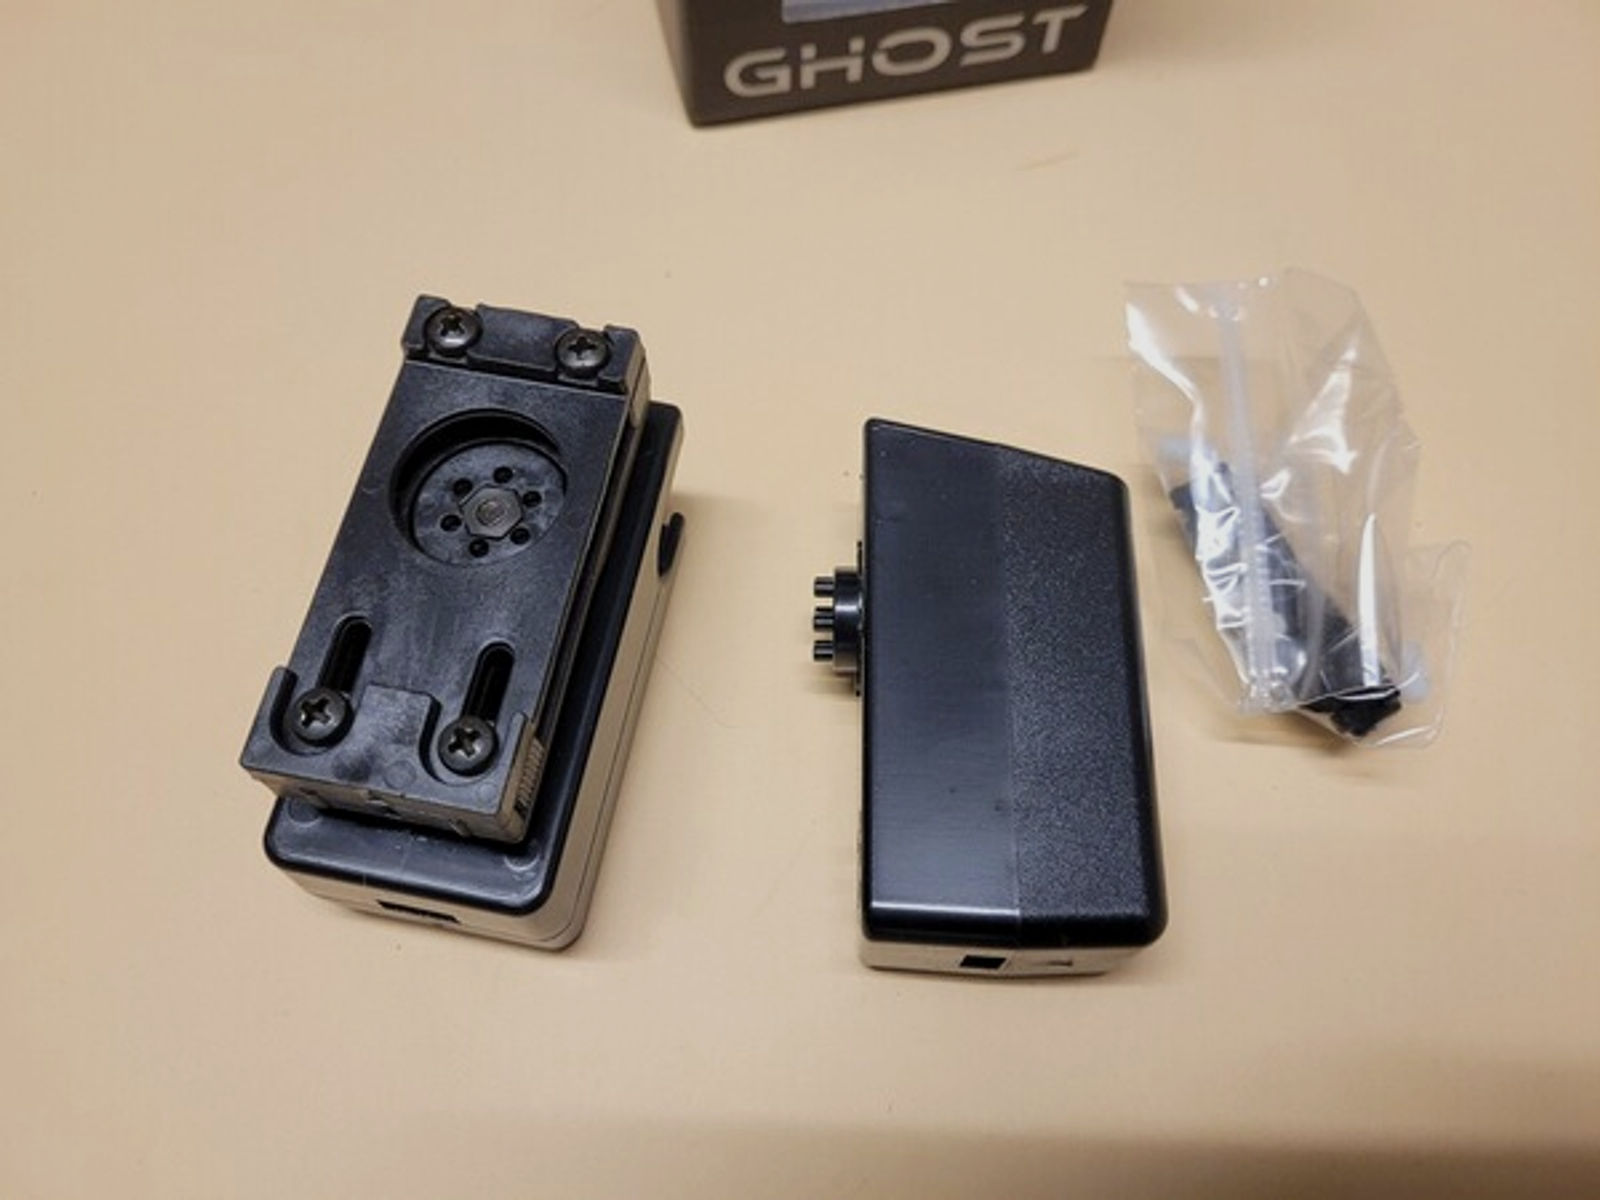 Ghost Magazin pouch for double row mags one rotation clip, two pouches, Black, Cod. SGMAGB